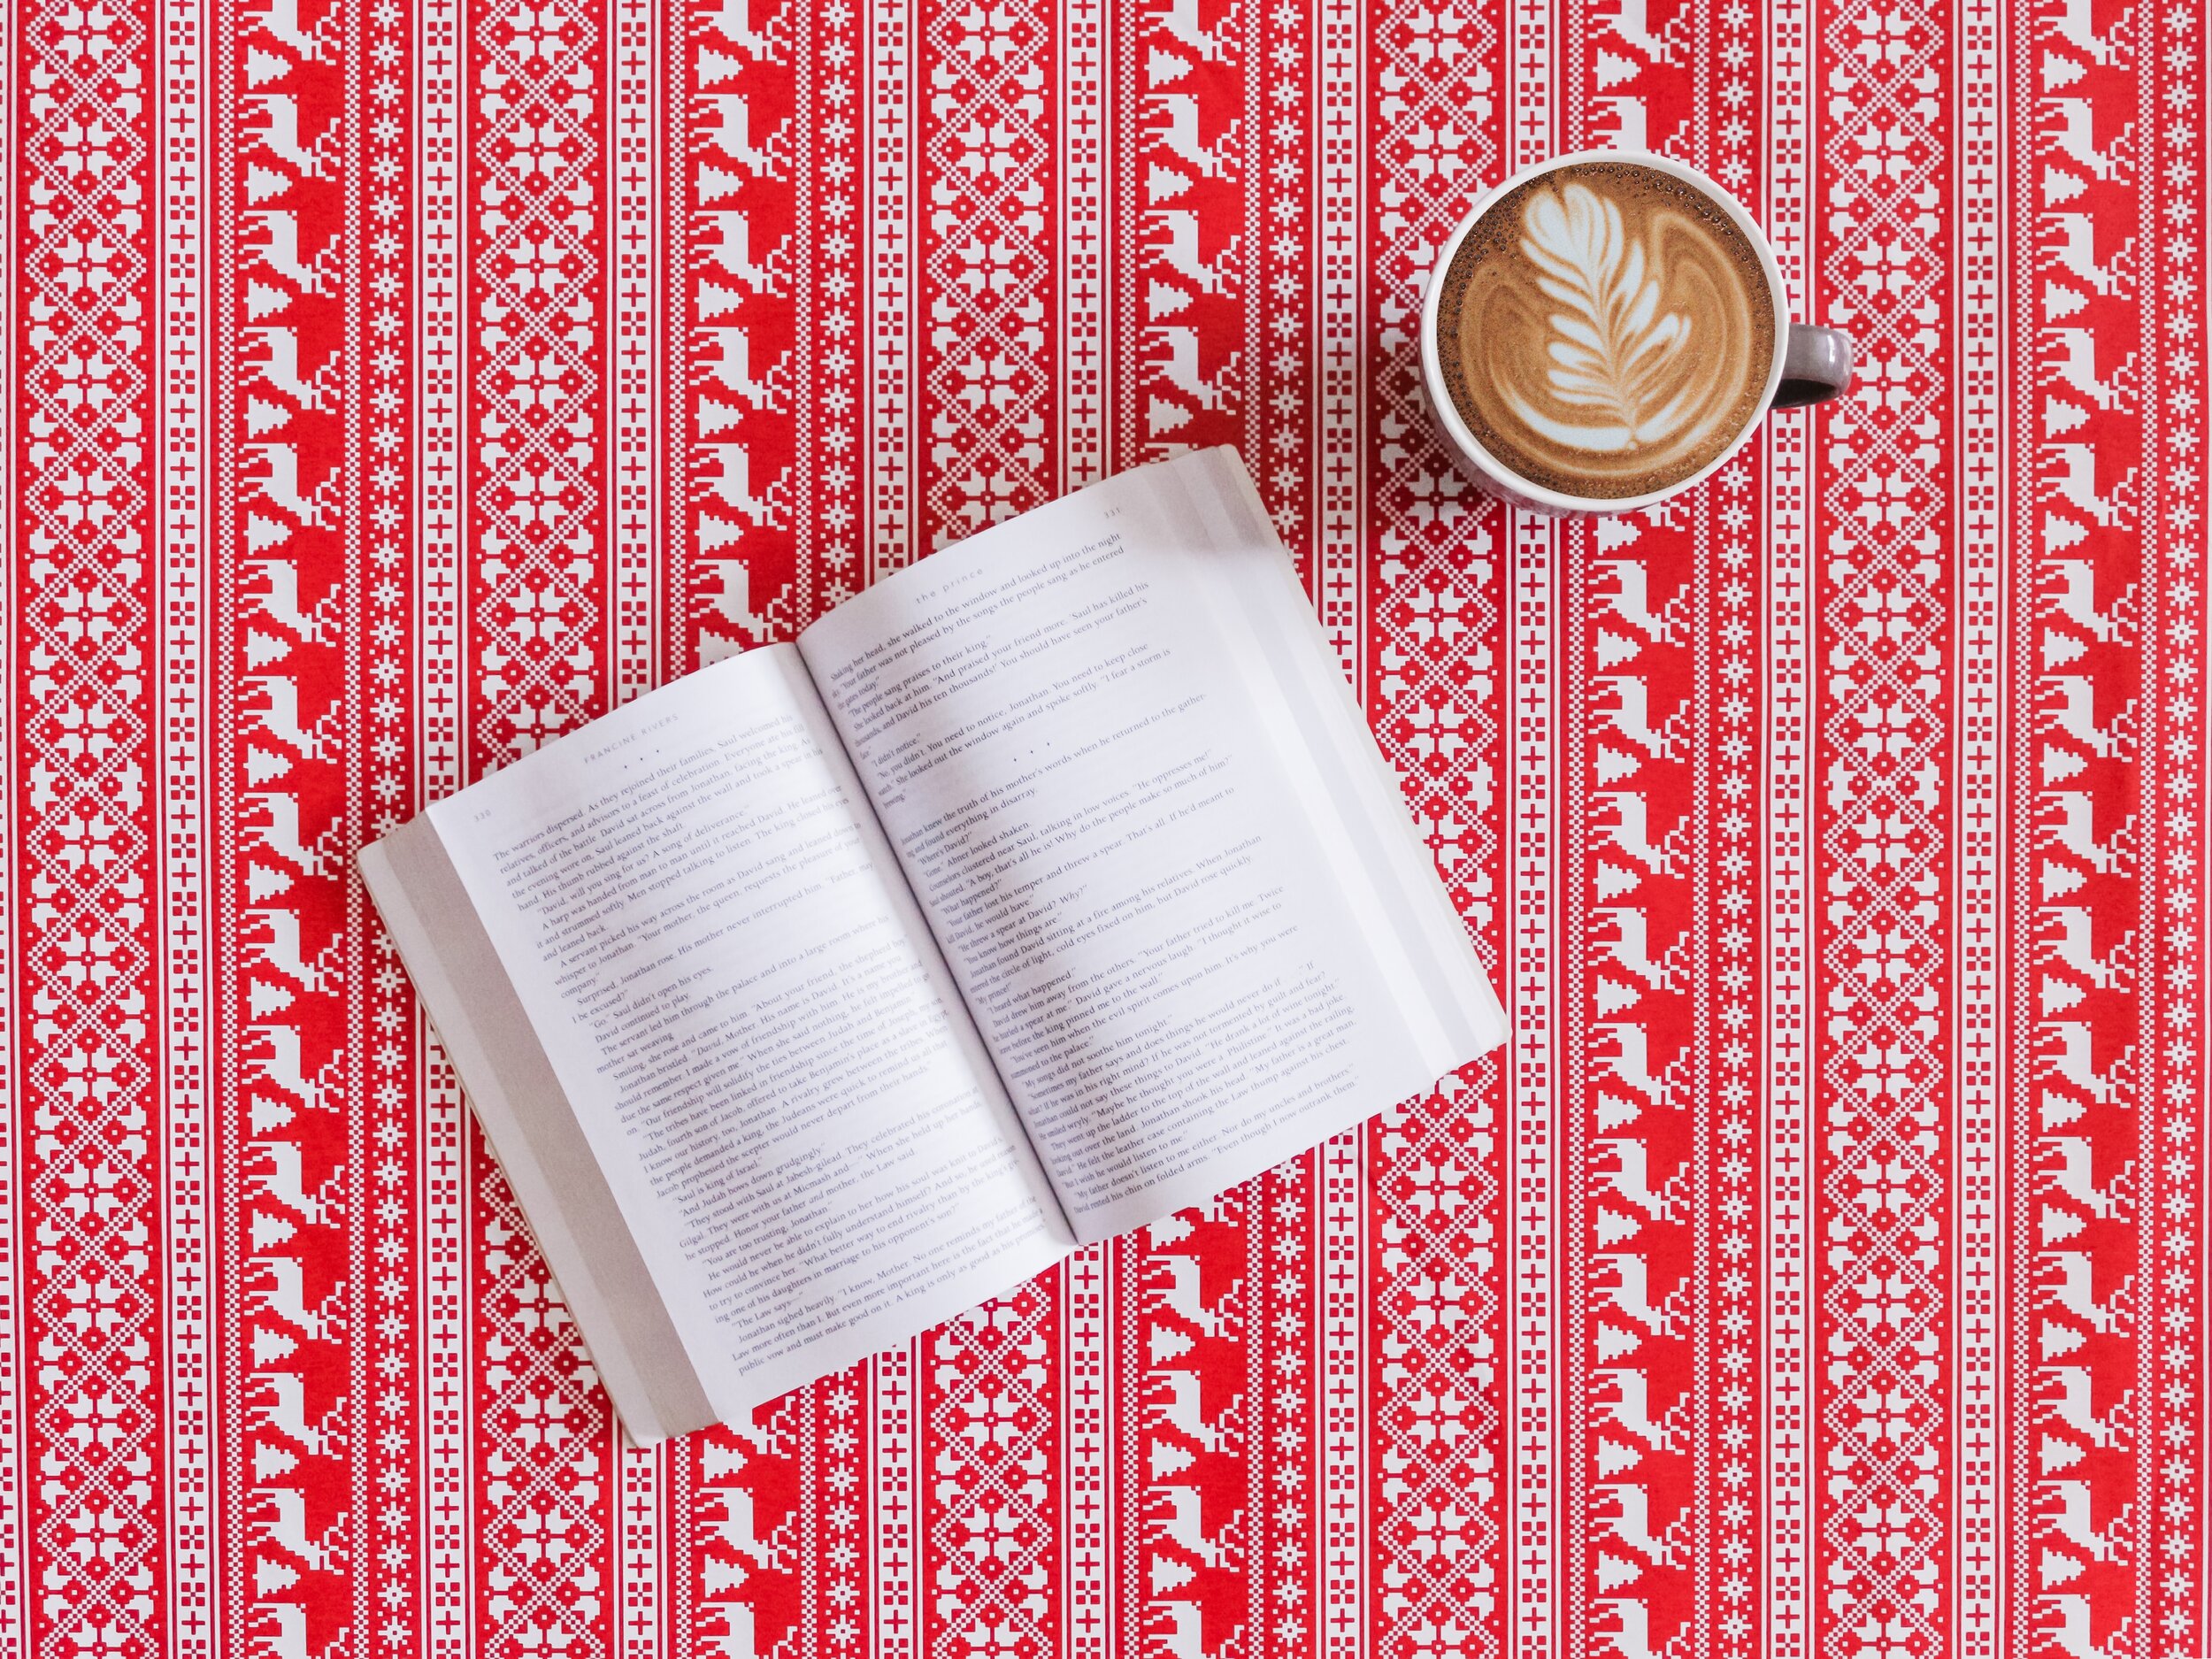 Your Holiday 2019 Book Recommendations Off The Beaten Shelf